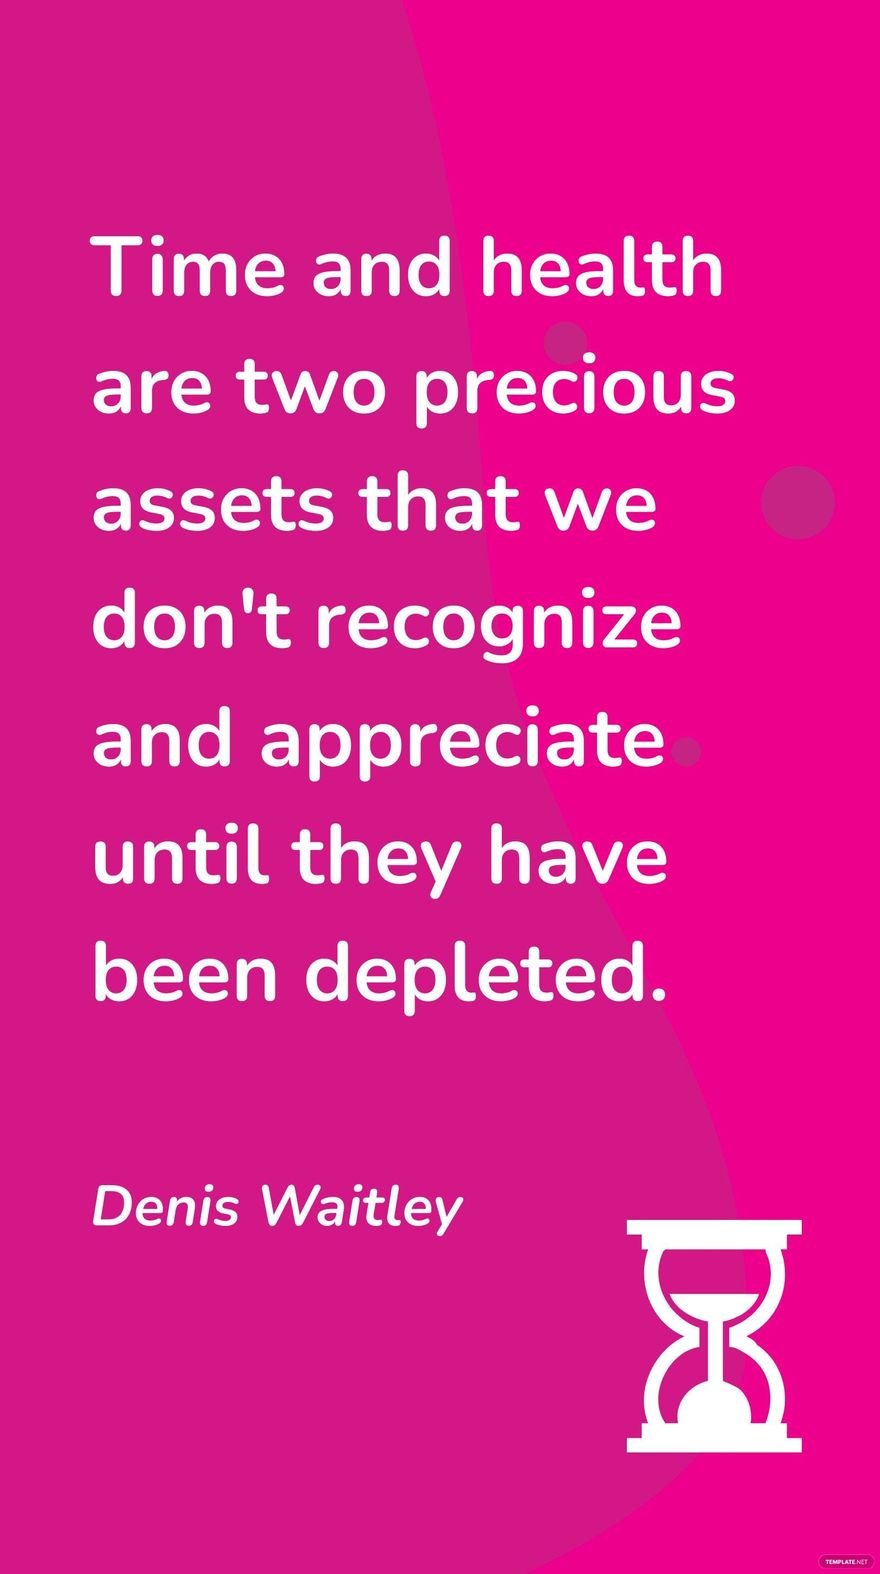 Free Denis Waitley - Time and health are two precious assets that we don't recognize and appreciate until they have been depleted. in JPG